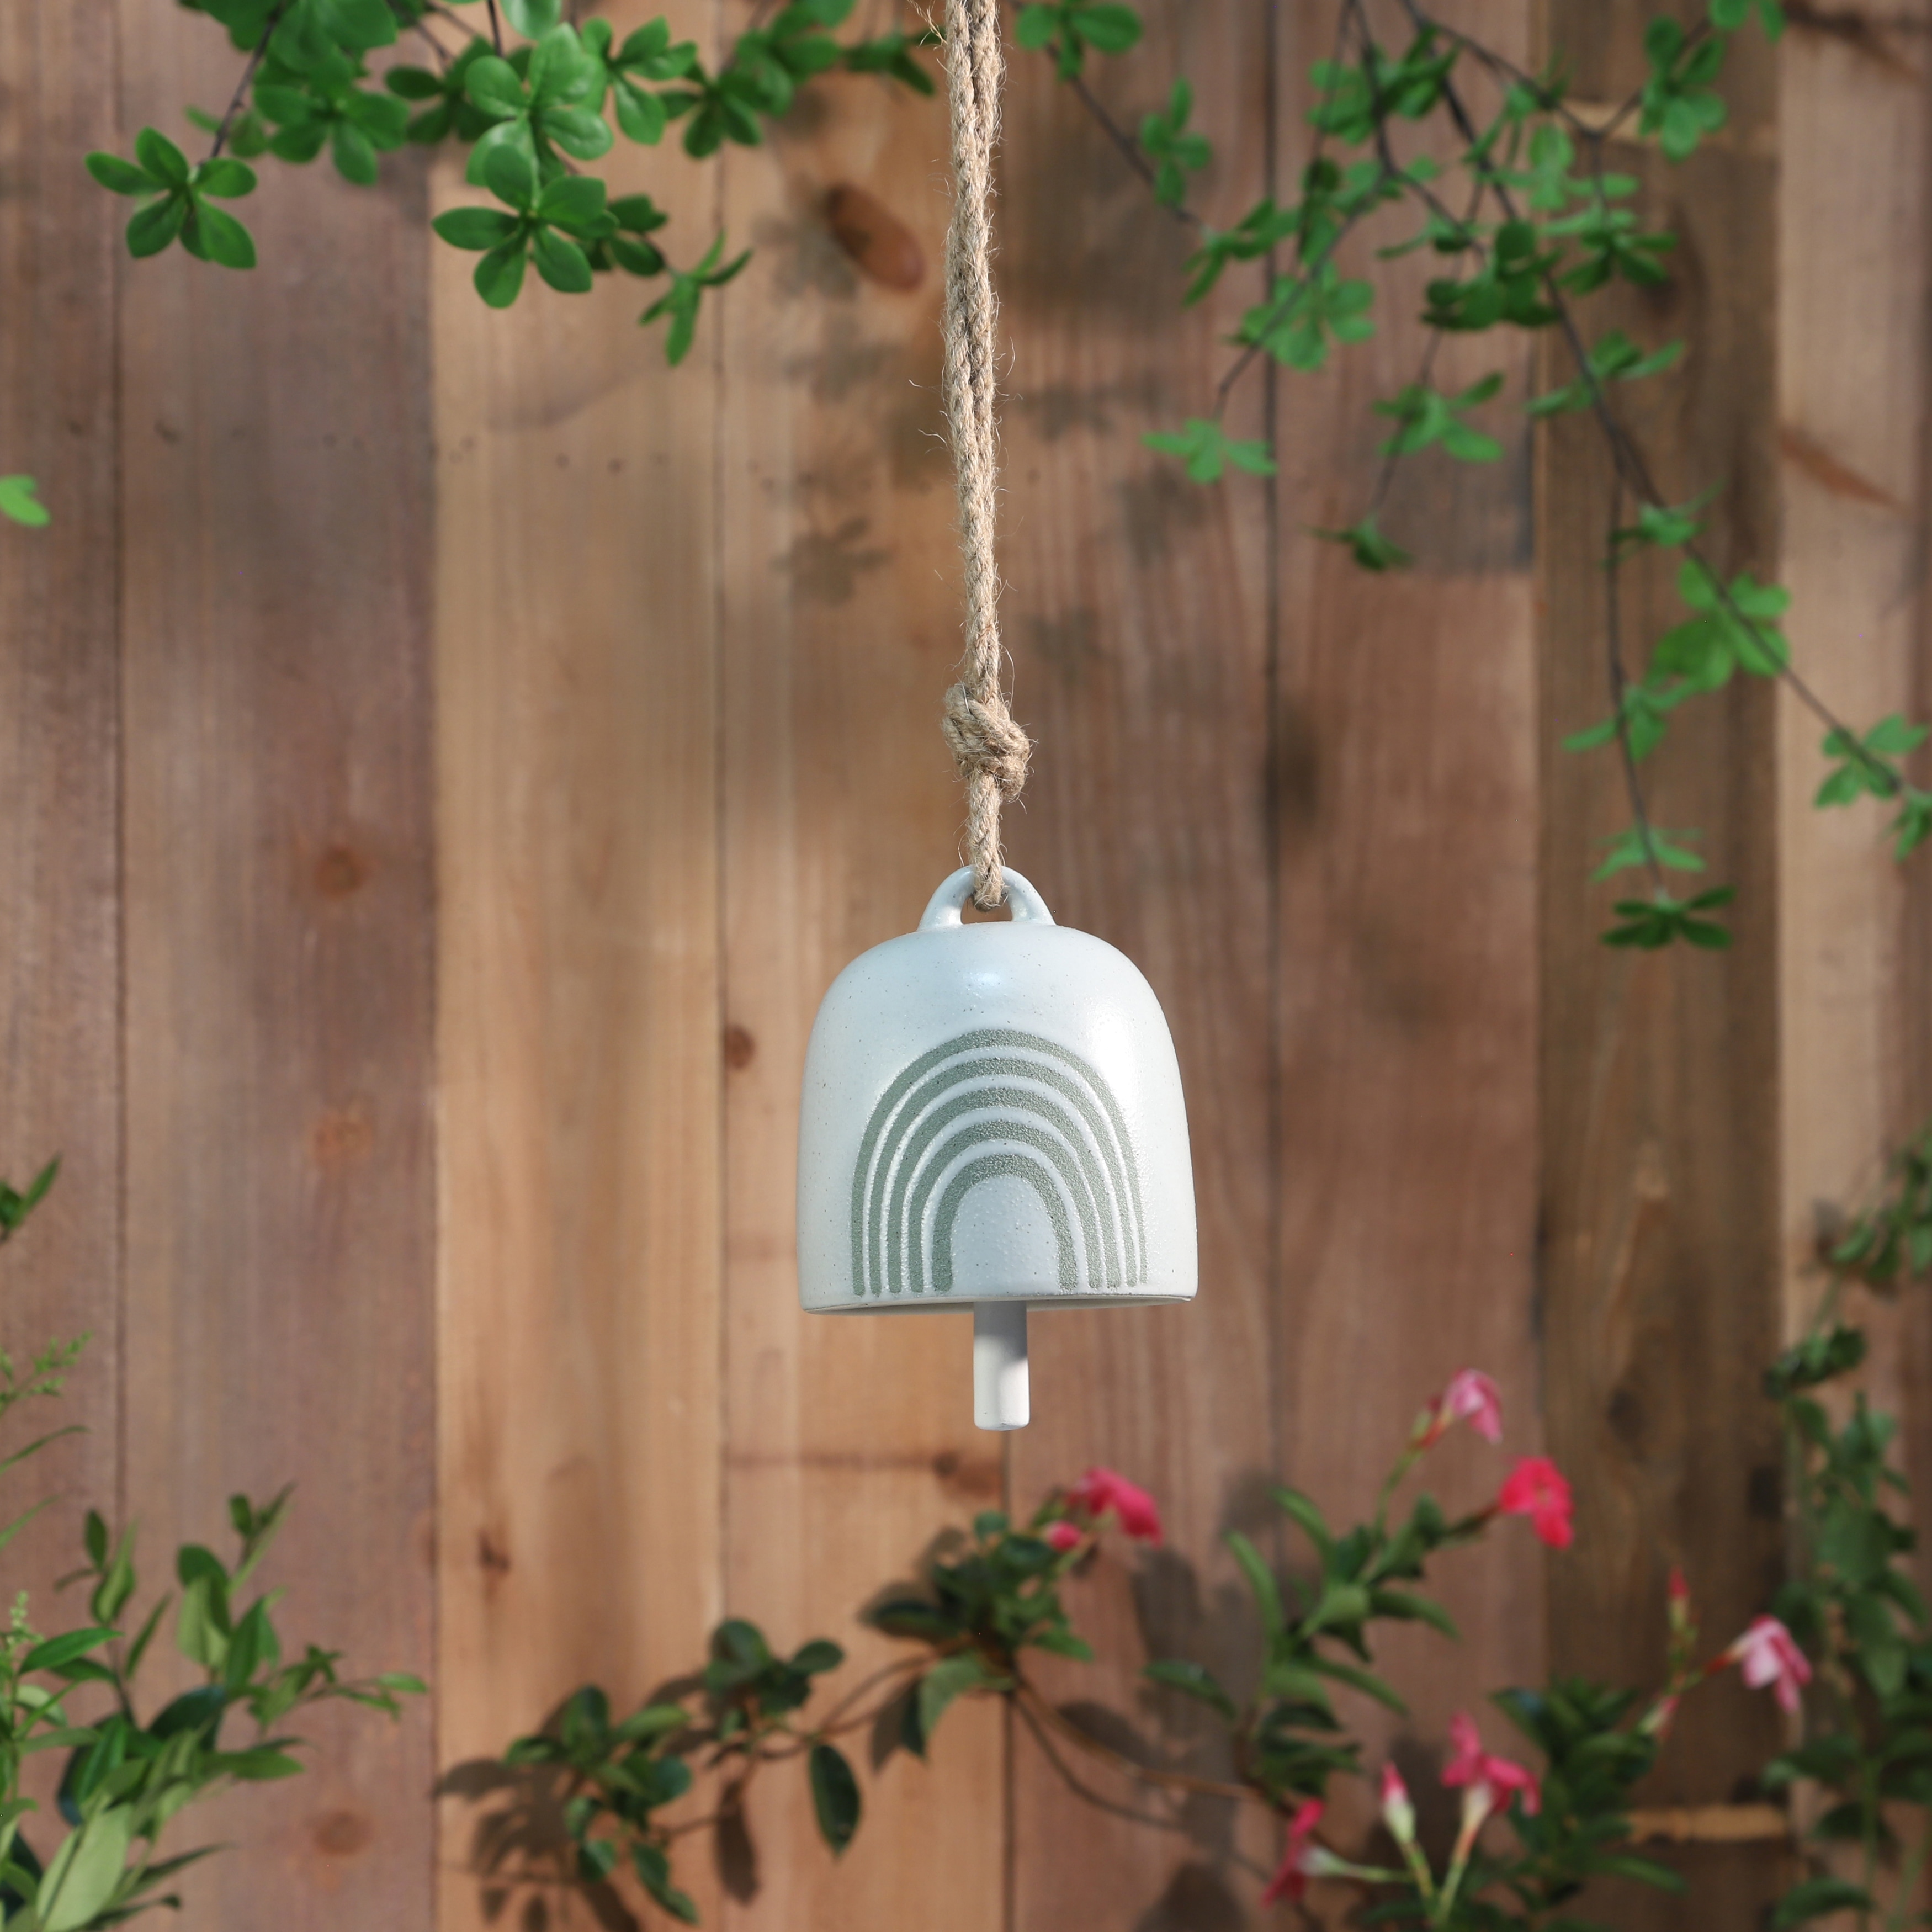 4" Hanging Bell Decorative Wind Chime White and Green Rainbow Design Outdoor or Indoor Decorative Bells for Home Decor